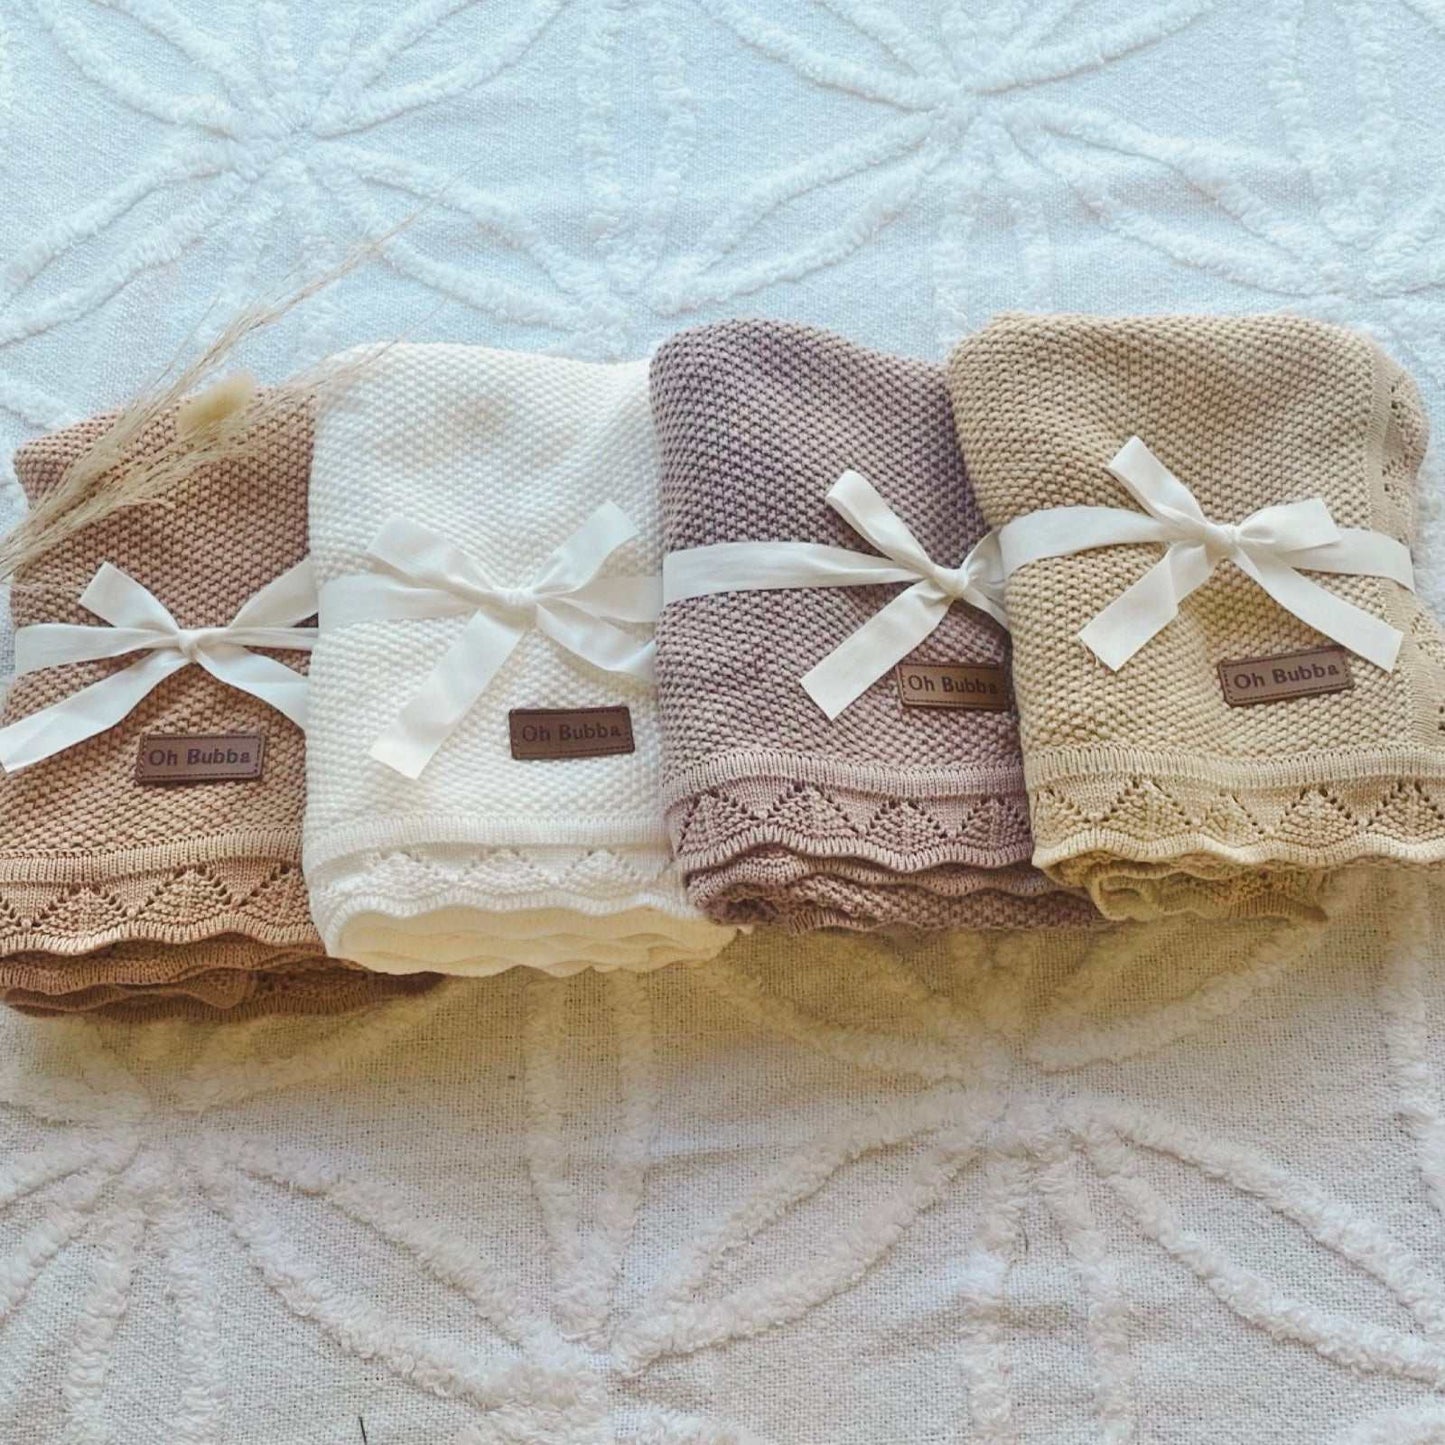 Heirloom Baby Knit Blankets. Dusty Rose, White, Mauve, Caramel Baby Blankets